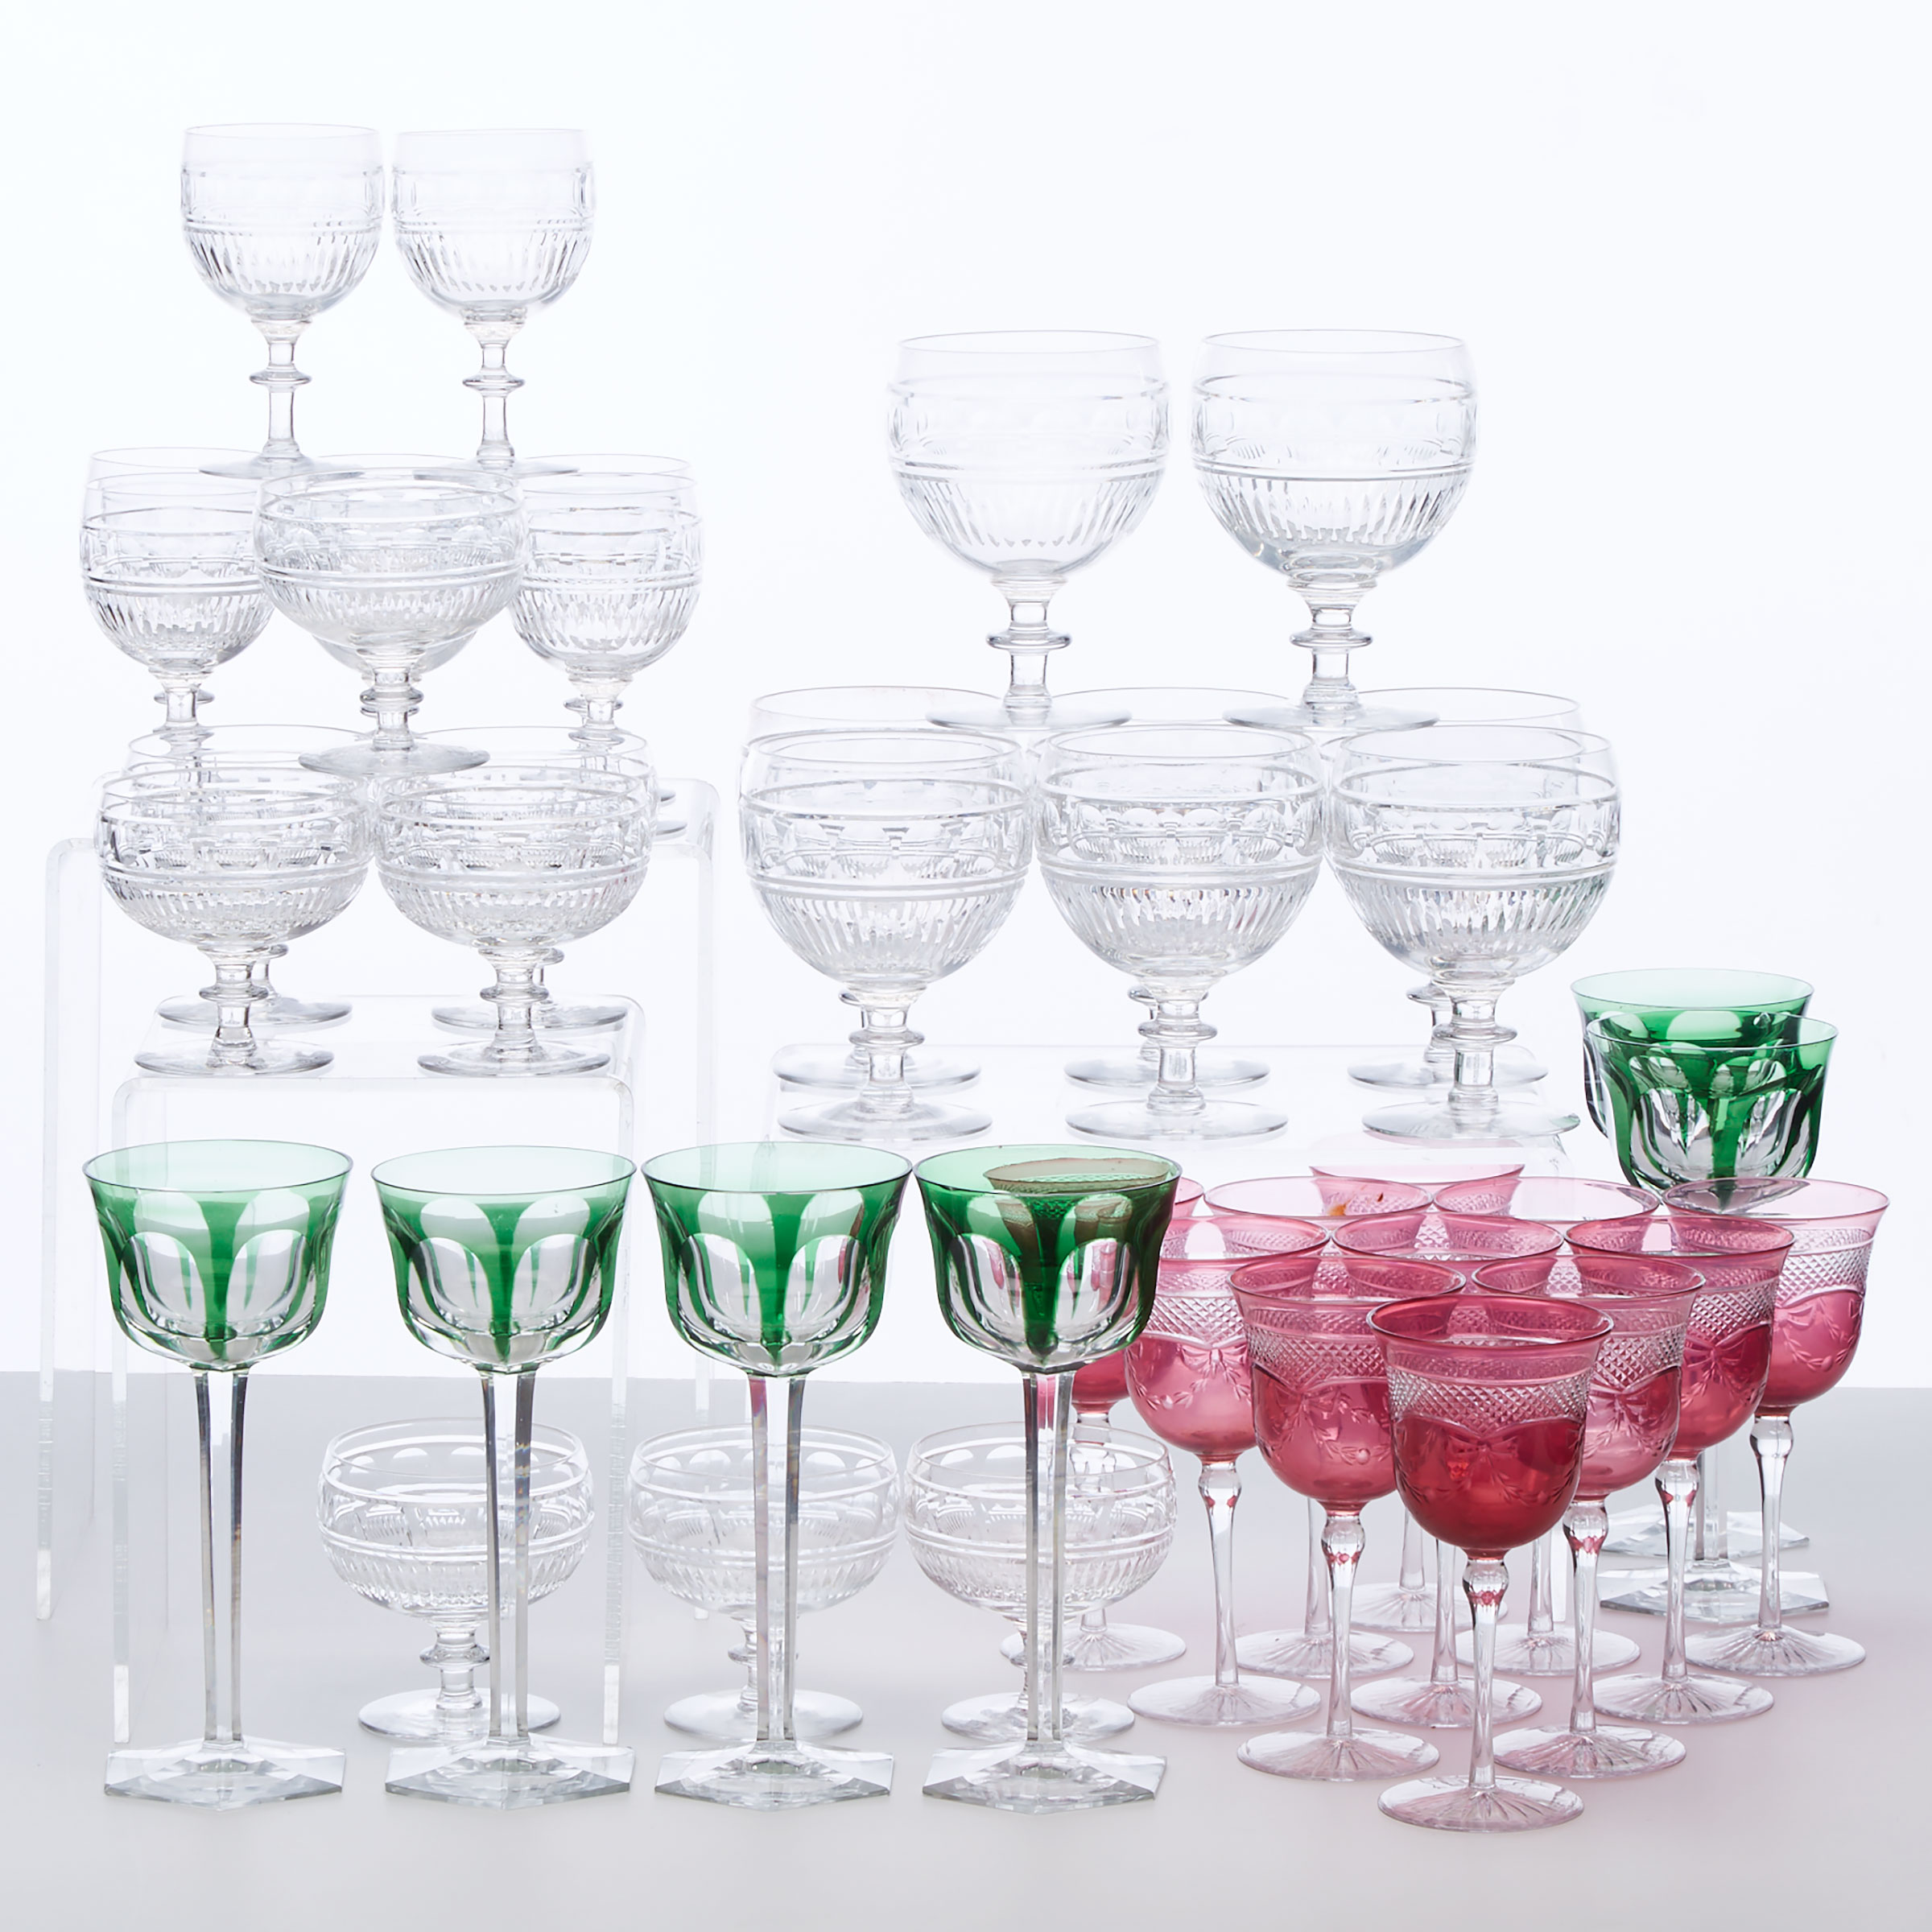 Group of Webb Corbett and other Coloured Cut Glass Stemware, 20th century